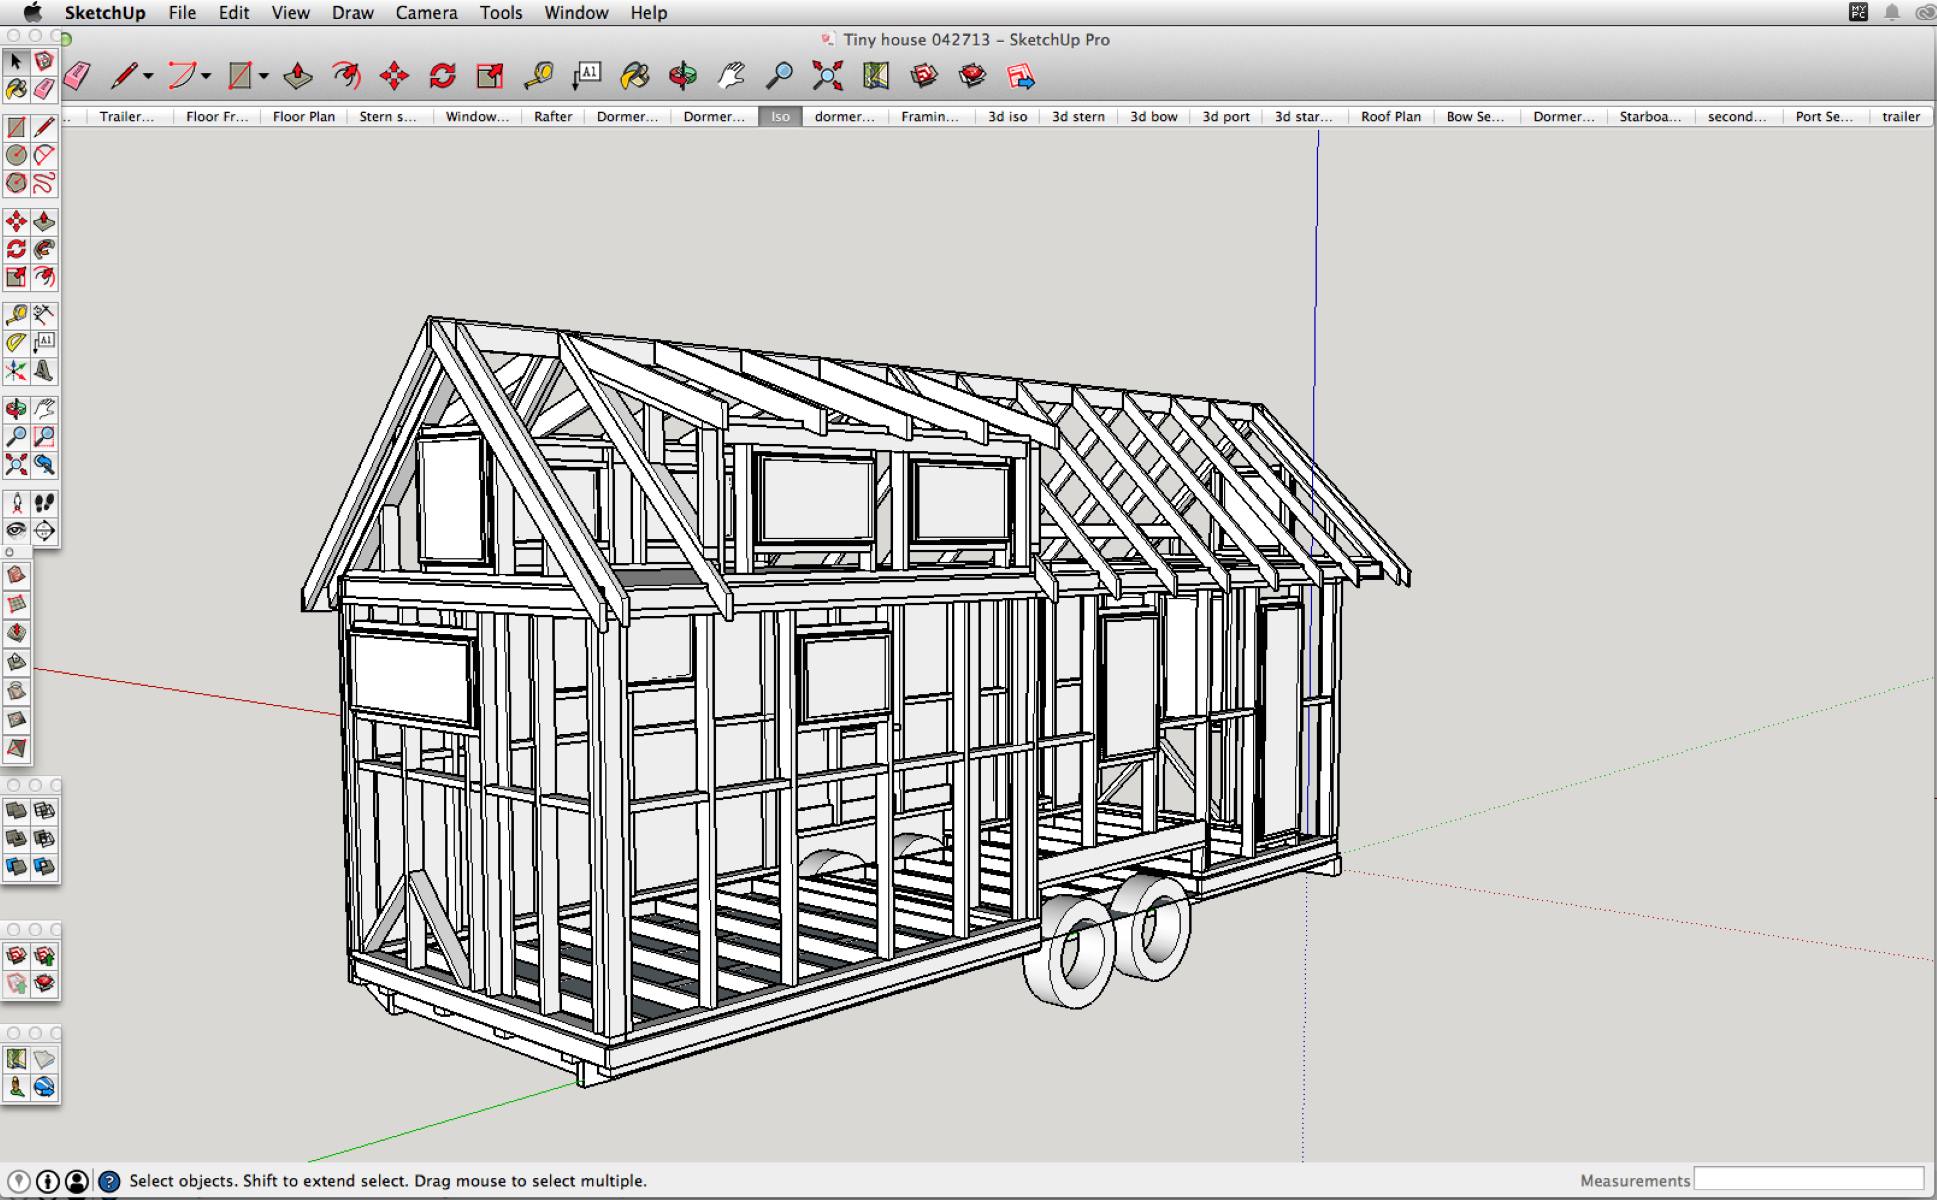 How To Use Sketchup To Design A Tiny House